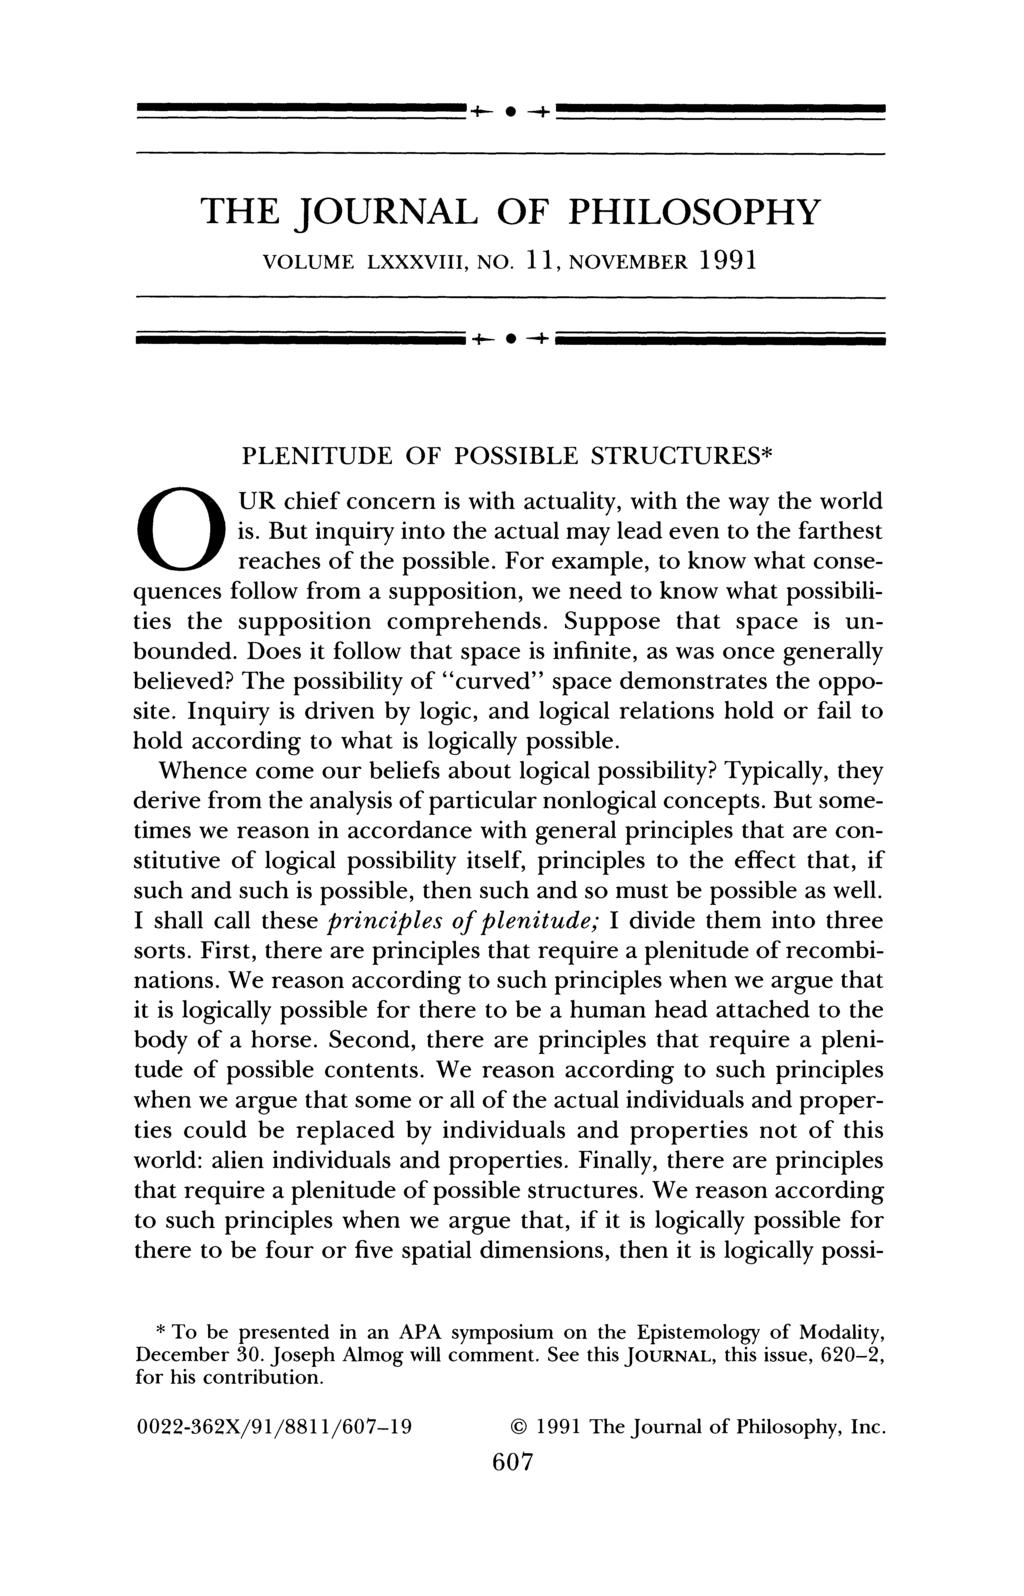 THE JOURNAL OF PHILOSOPHY VOLUME LXXXVIII, NO. 11, NOVEMBER 1991 PLENITUDE OF POSSIBLE STRUCTURES* O U R chief concern is with actuality, with the way the world is.